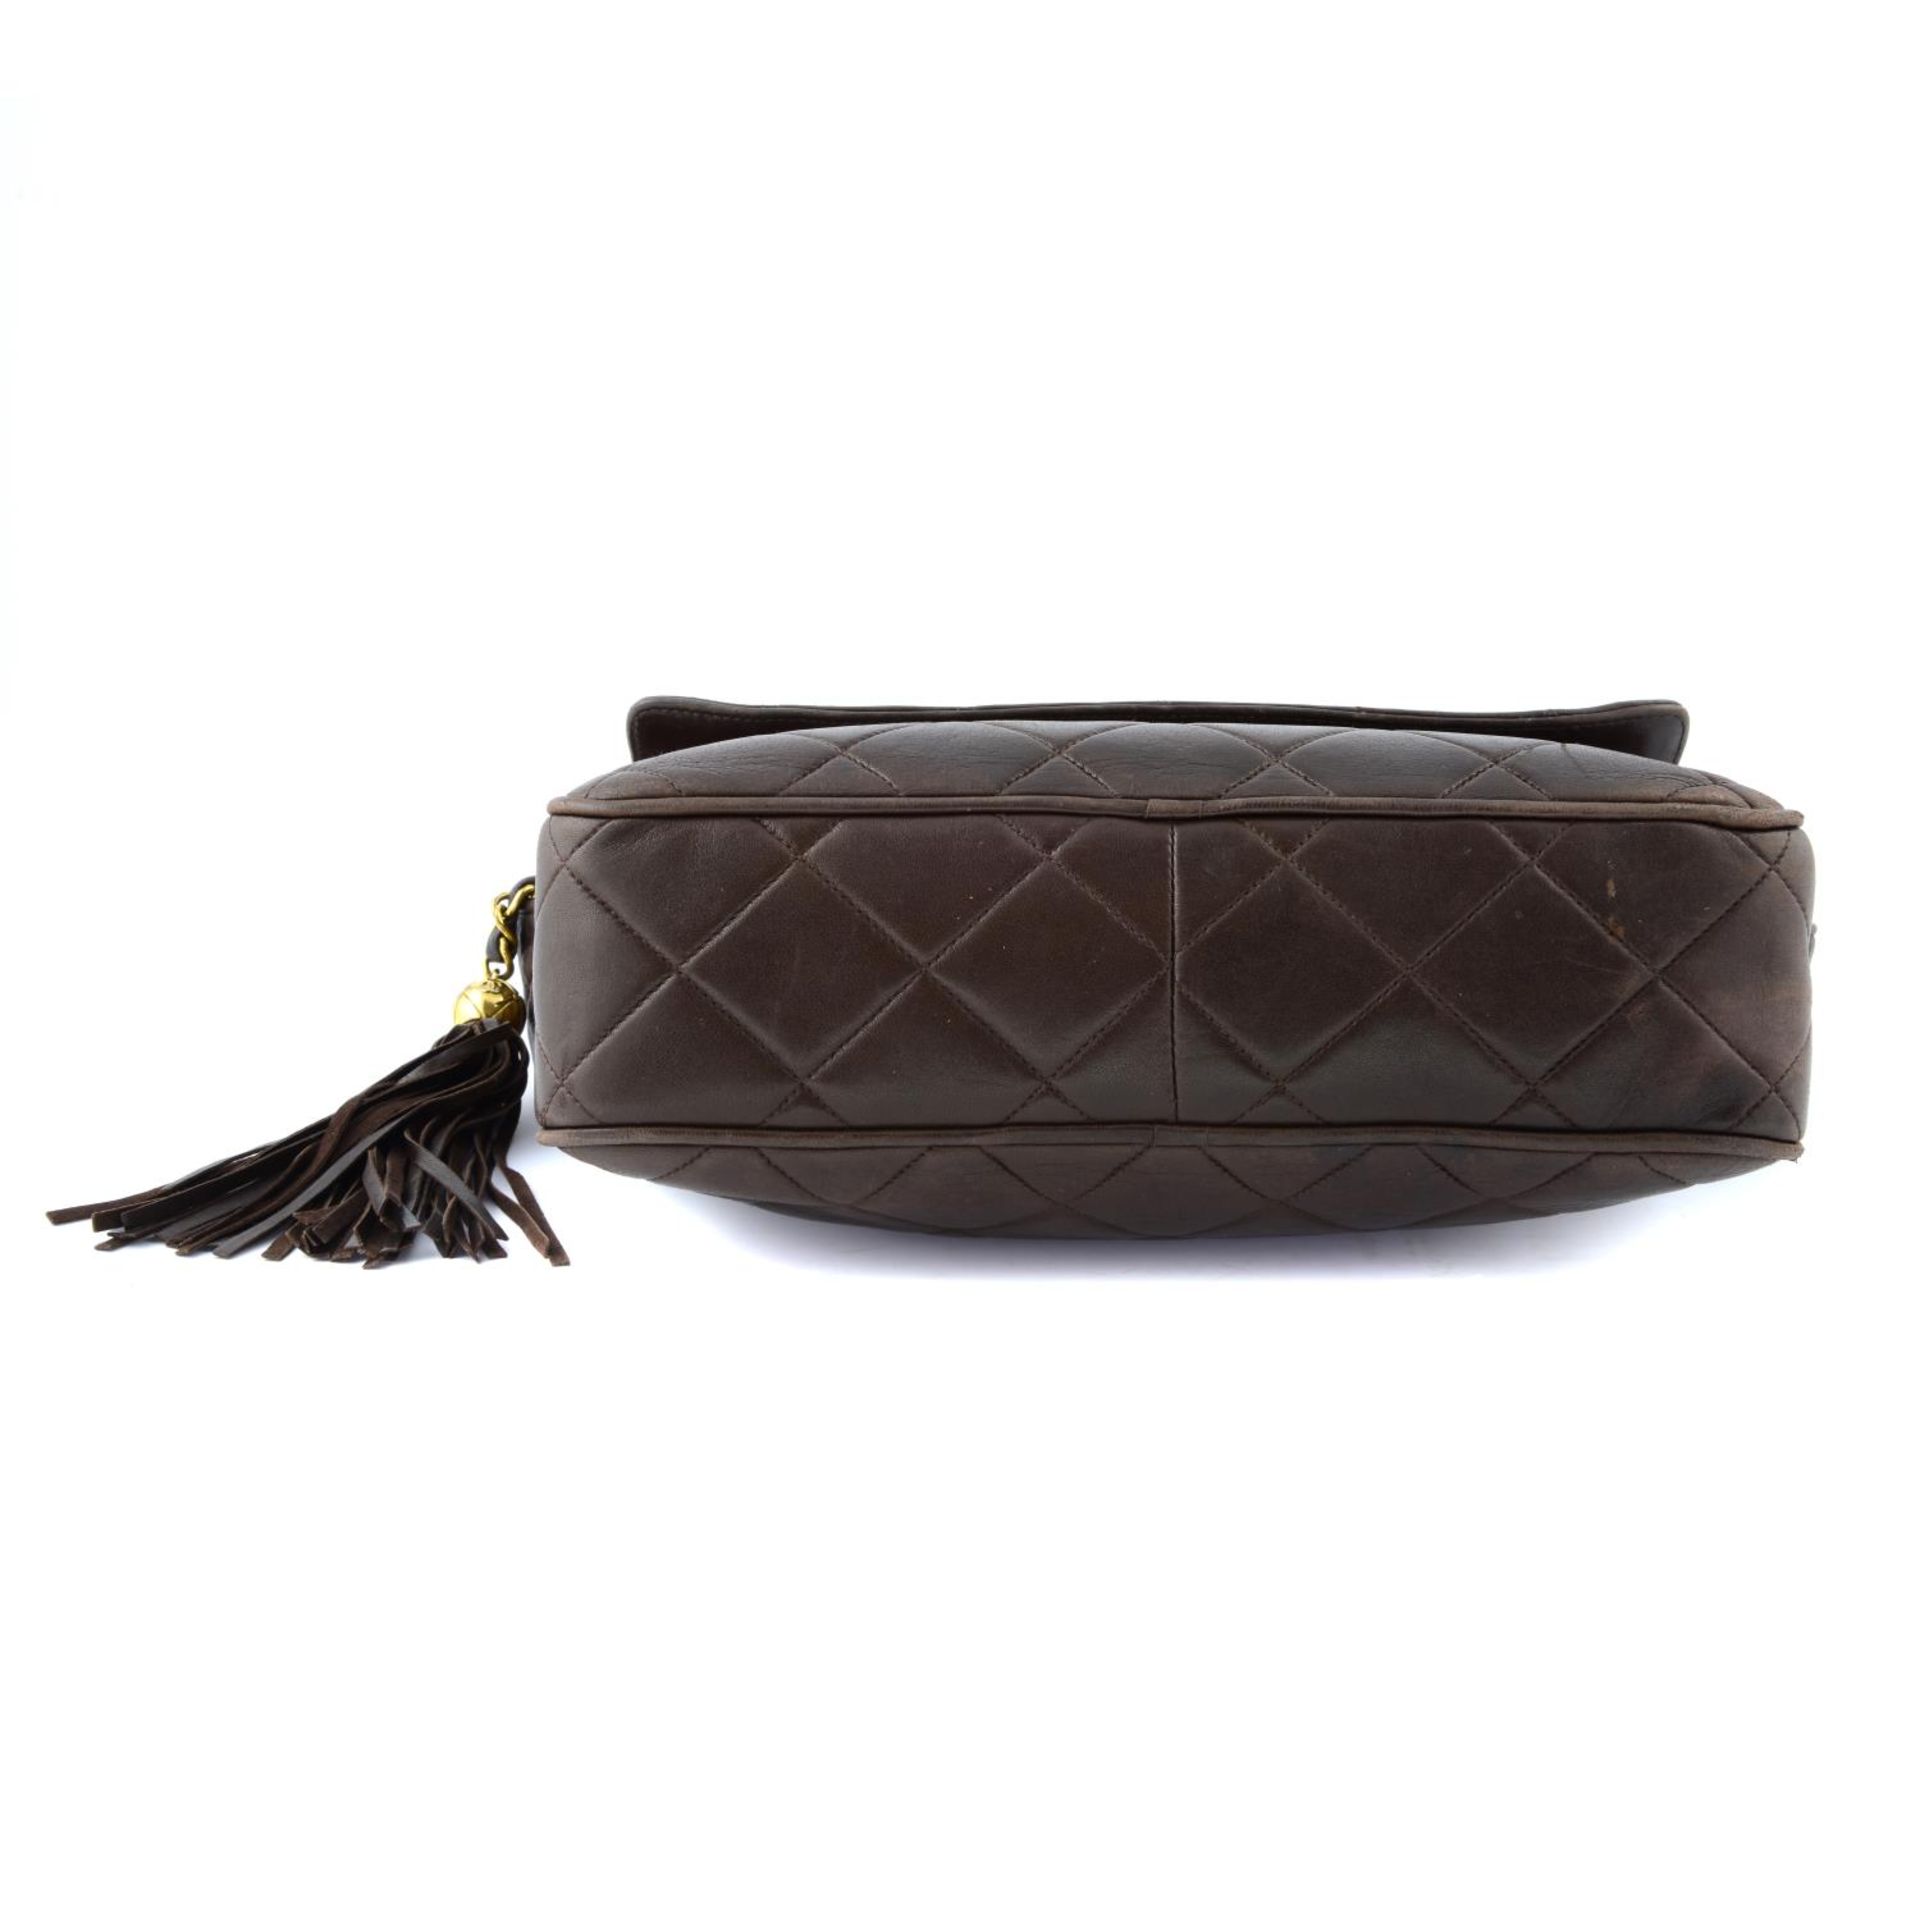 CHANEL - a brown diamond quilted crossbody handbag. - Image 5 of 5